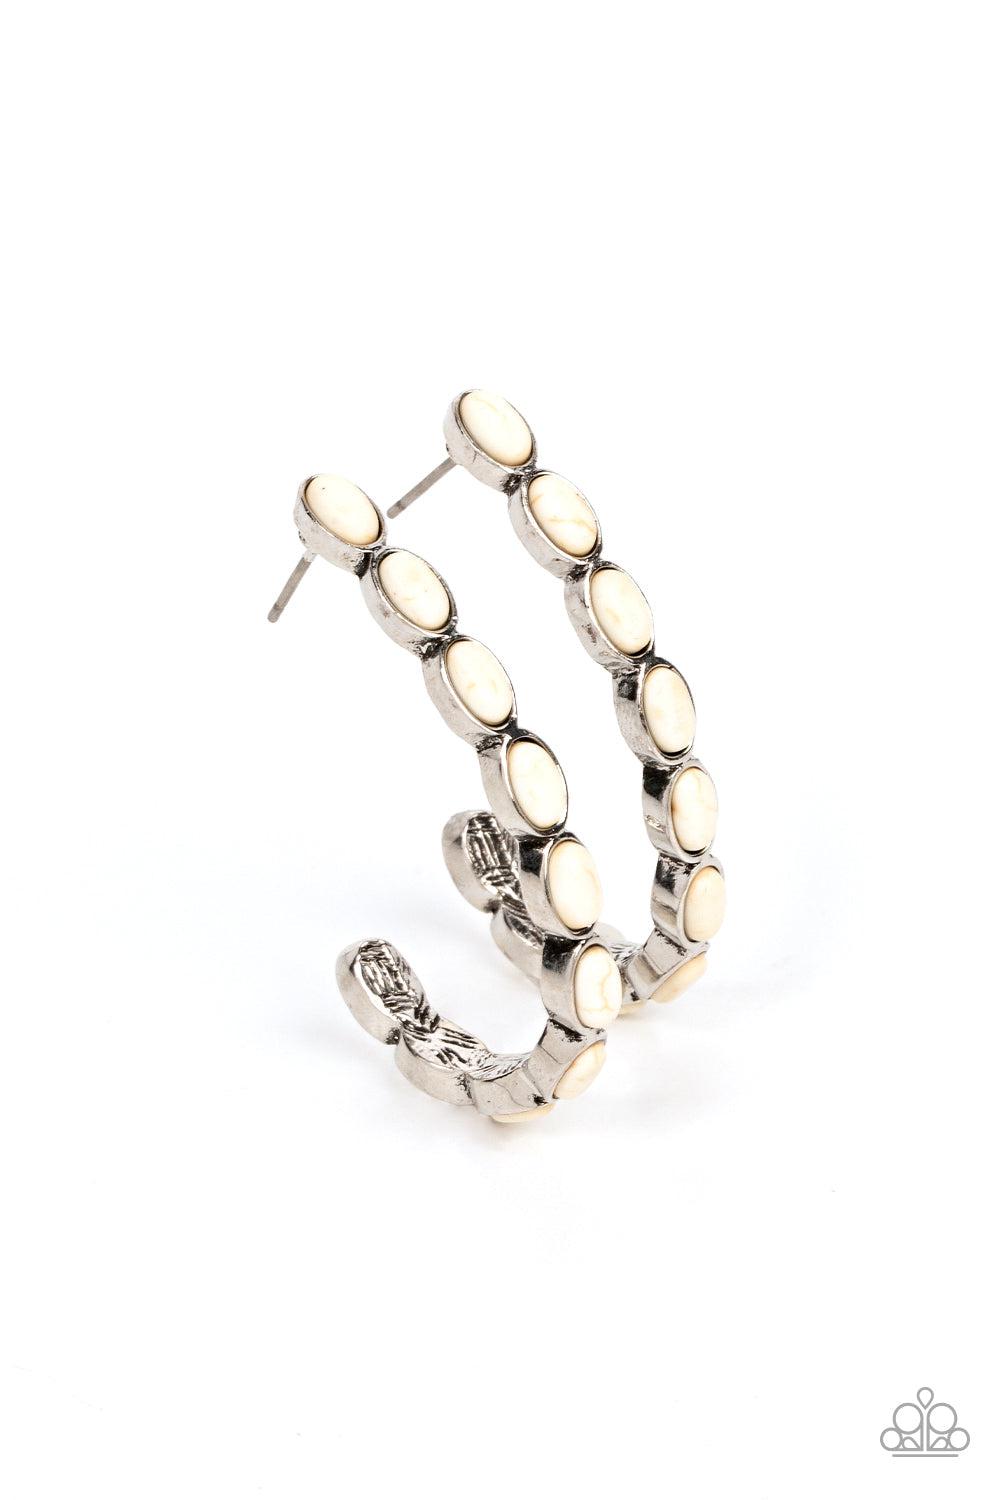 Kick Up a SANDSTORM White Stone Hoop Earrings - Paparazzi Accessories- lightbox - CarasShop.com - $5 Jewelry by Cara Jewels